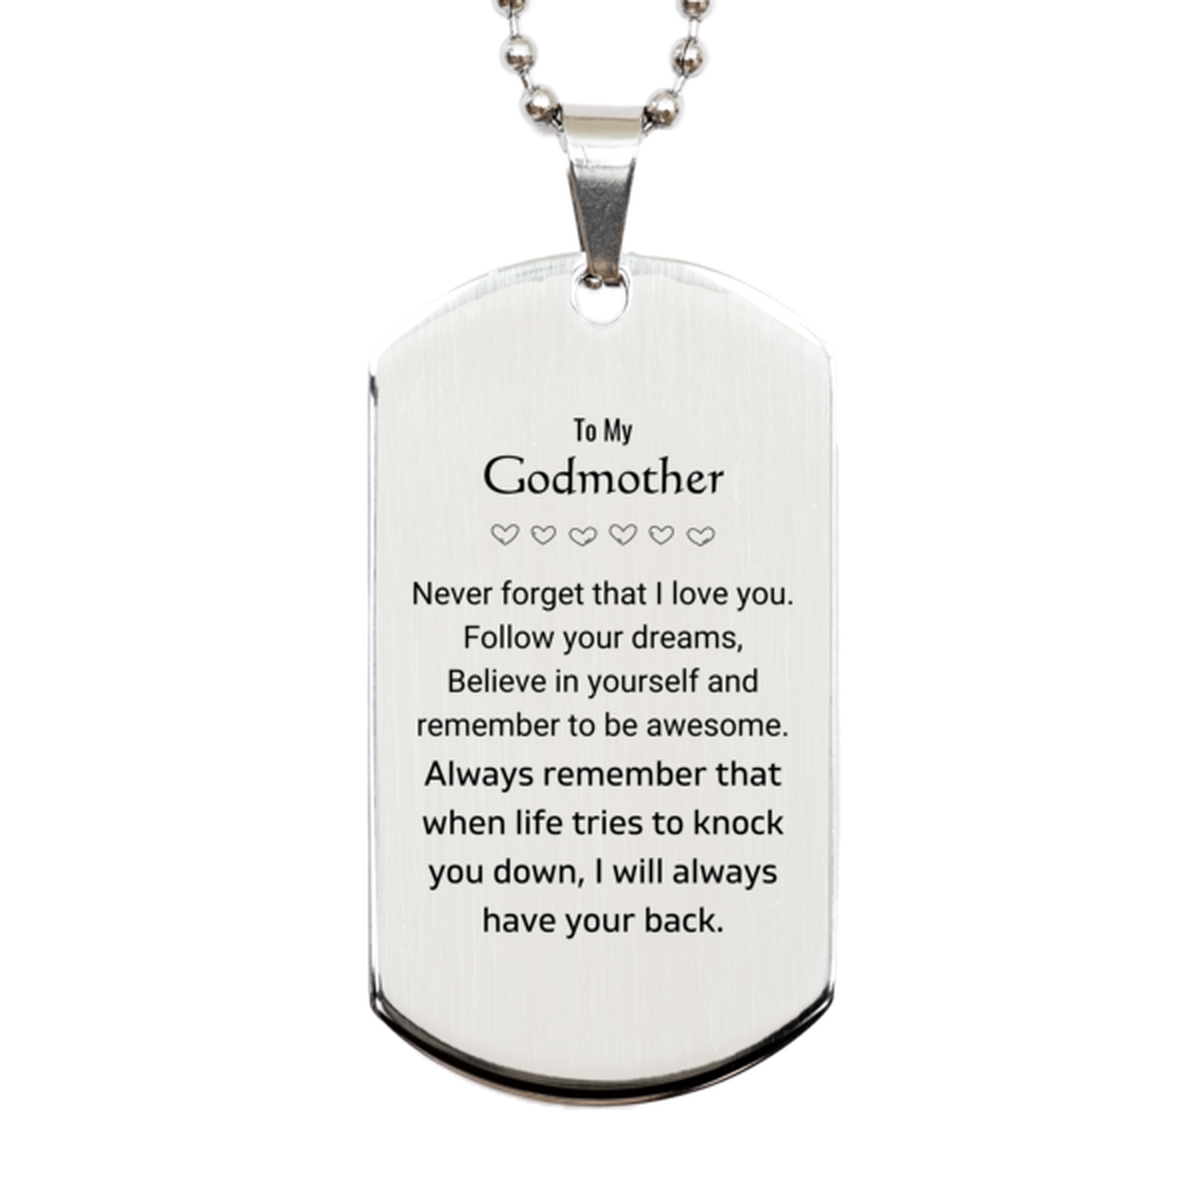 Inspirational Gifts for Godmother, Follow your dreams, Believe in yourself, Godmother Silver Dog Tag, Birthday Christmas Unique Gifts For Godmother